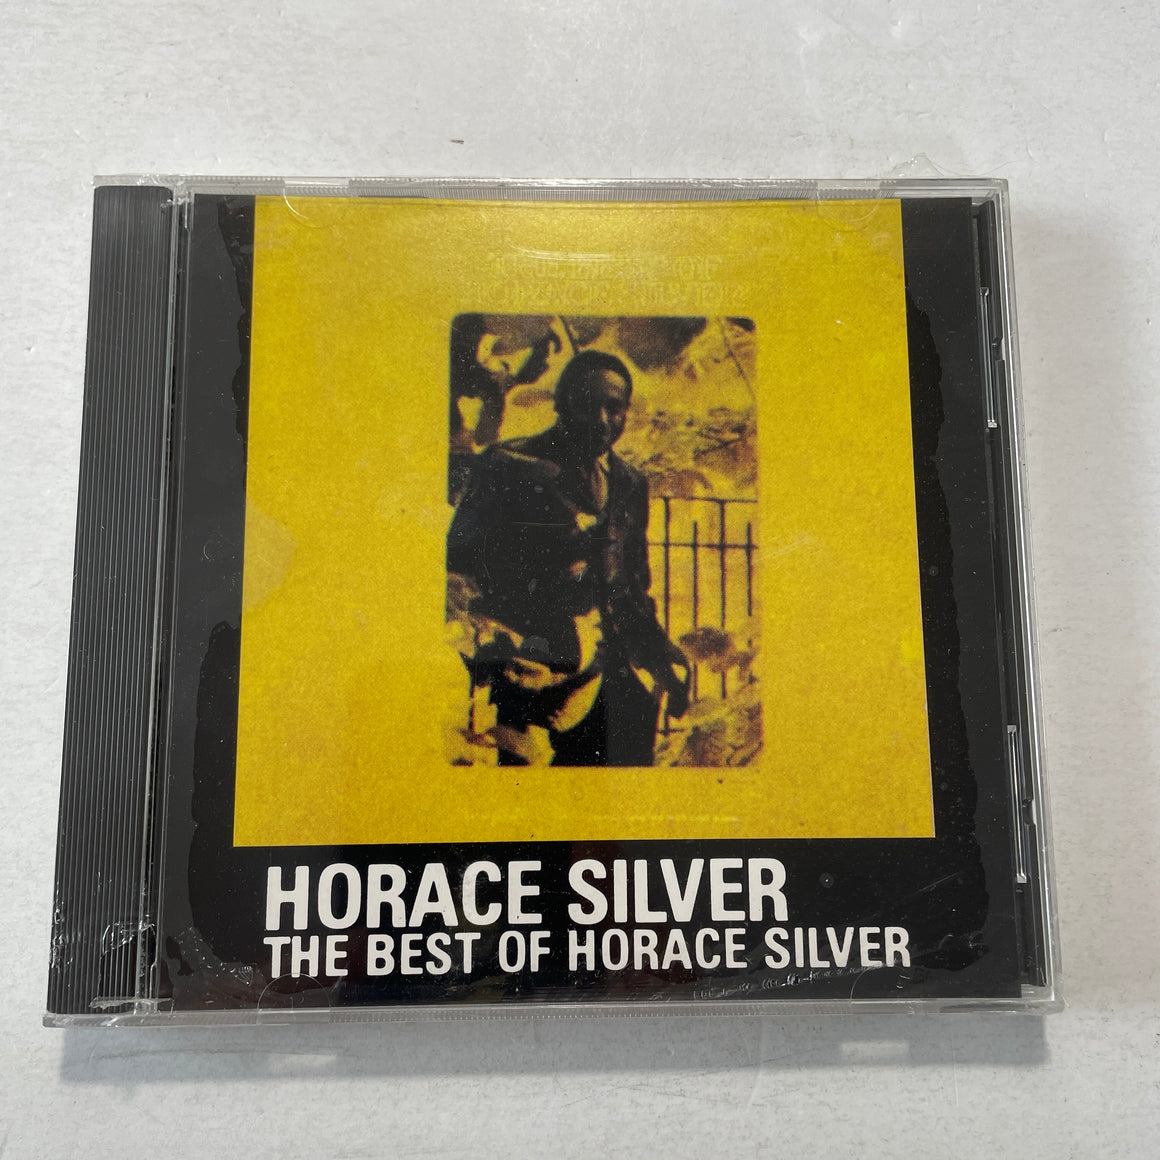 The Best Of Horace Silver New Sealed CD Creative Sounds Ltd. – APBC 2321